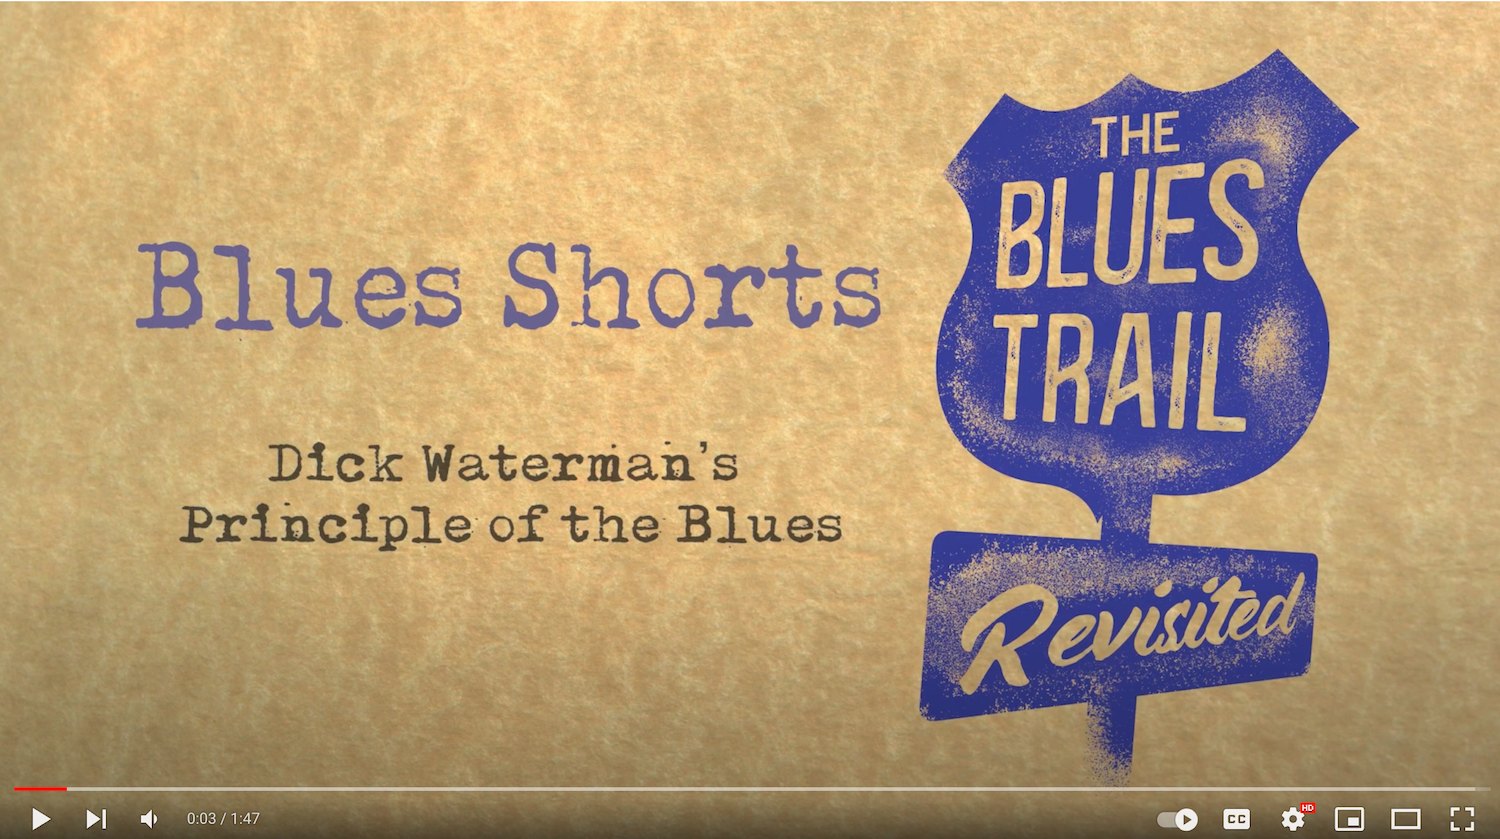 Load video: Video of Dick Waterman on The Blues Trail Revisited